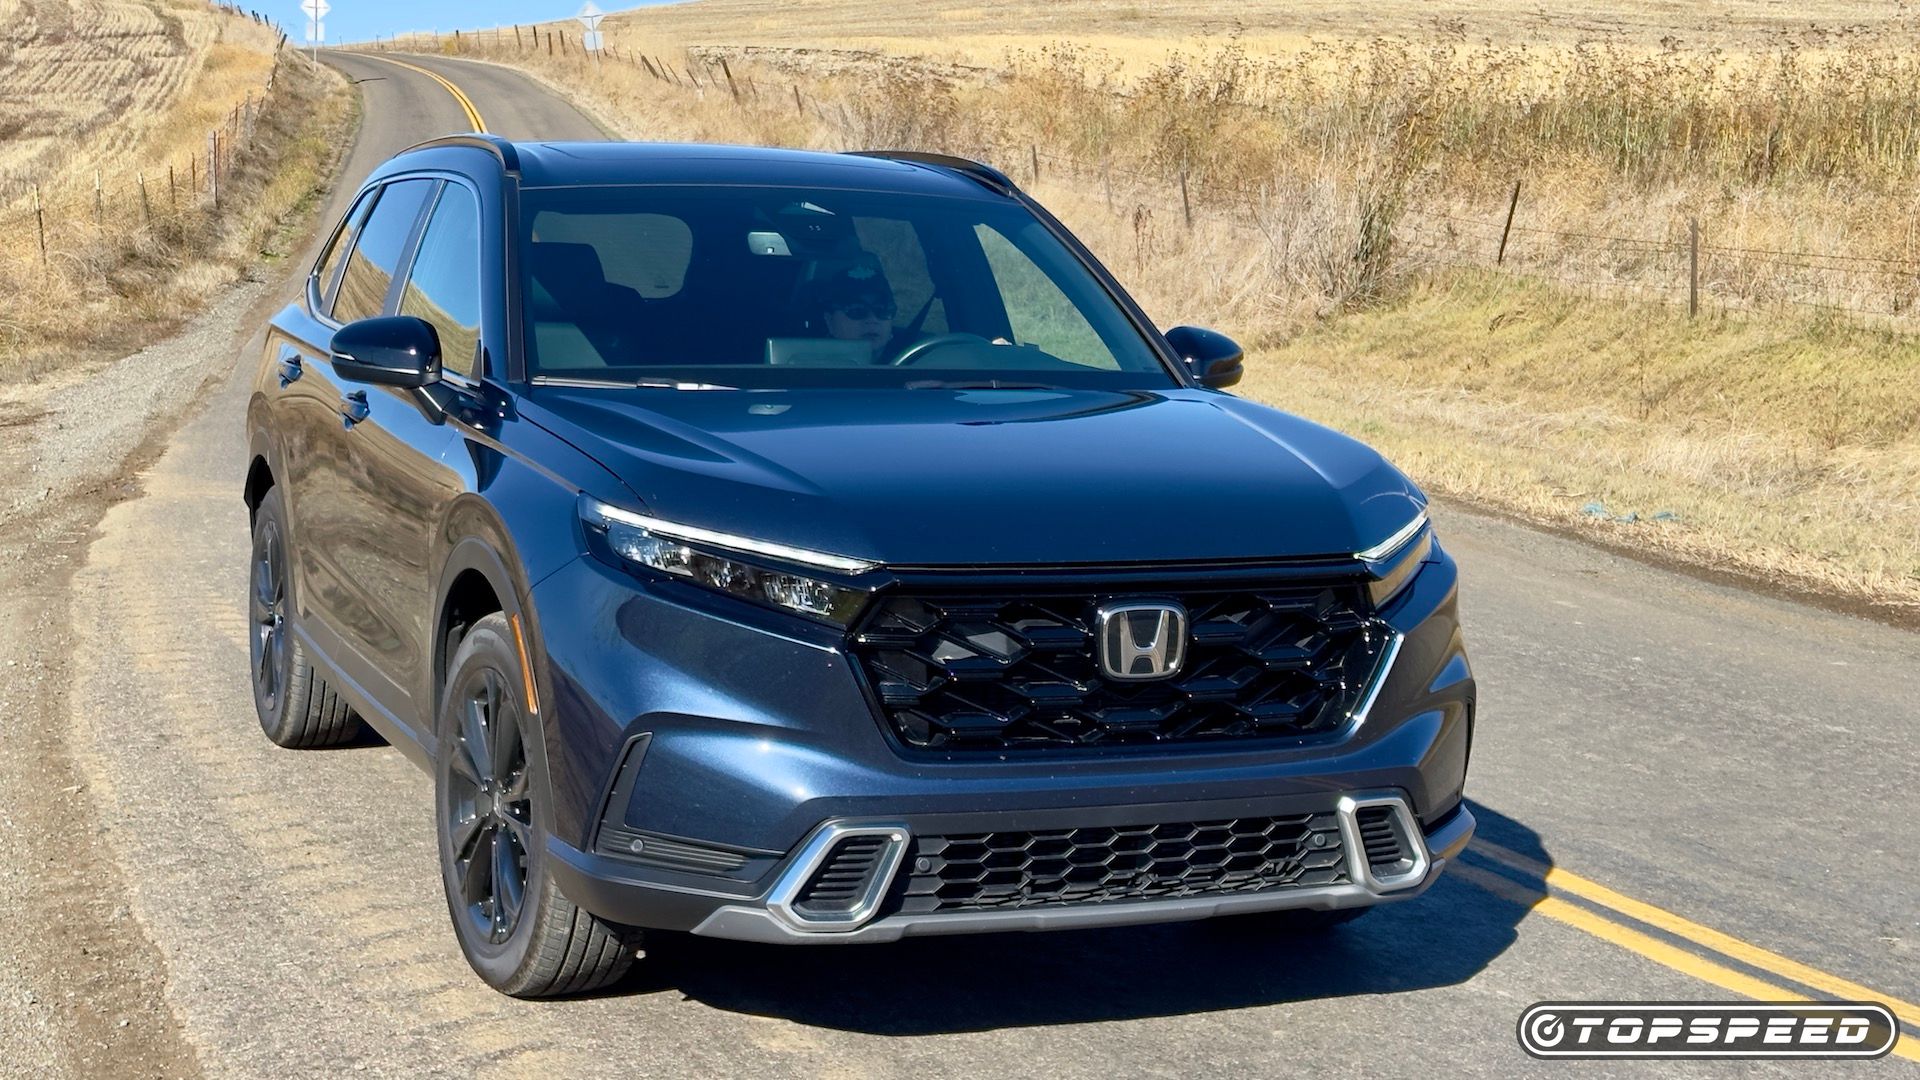 Every Honda SUV Model Ranked By Reliability